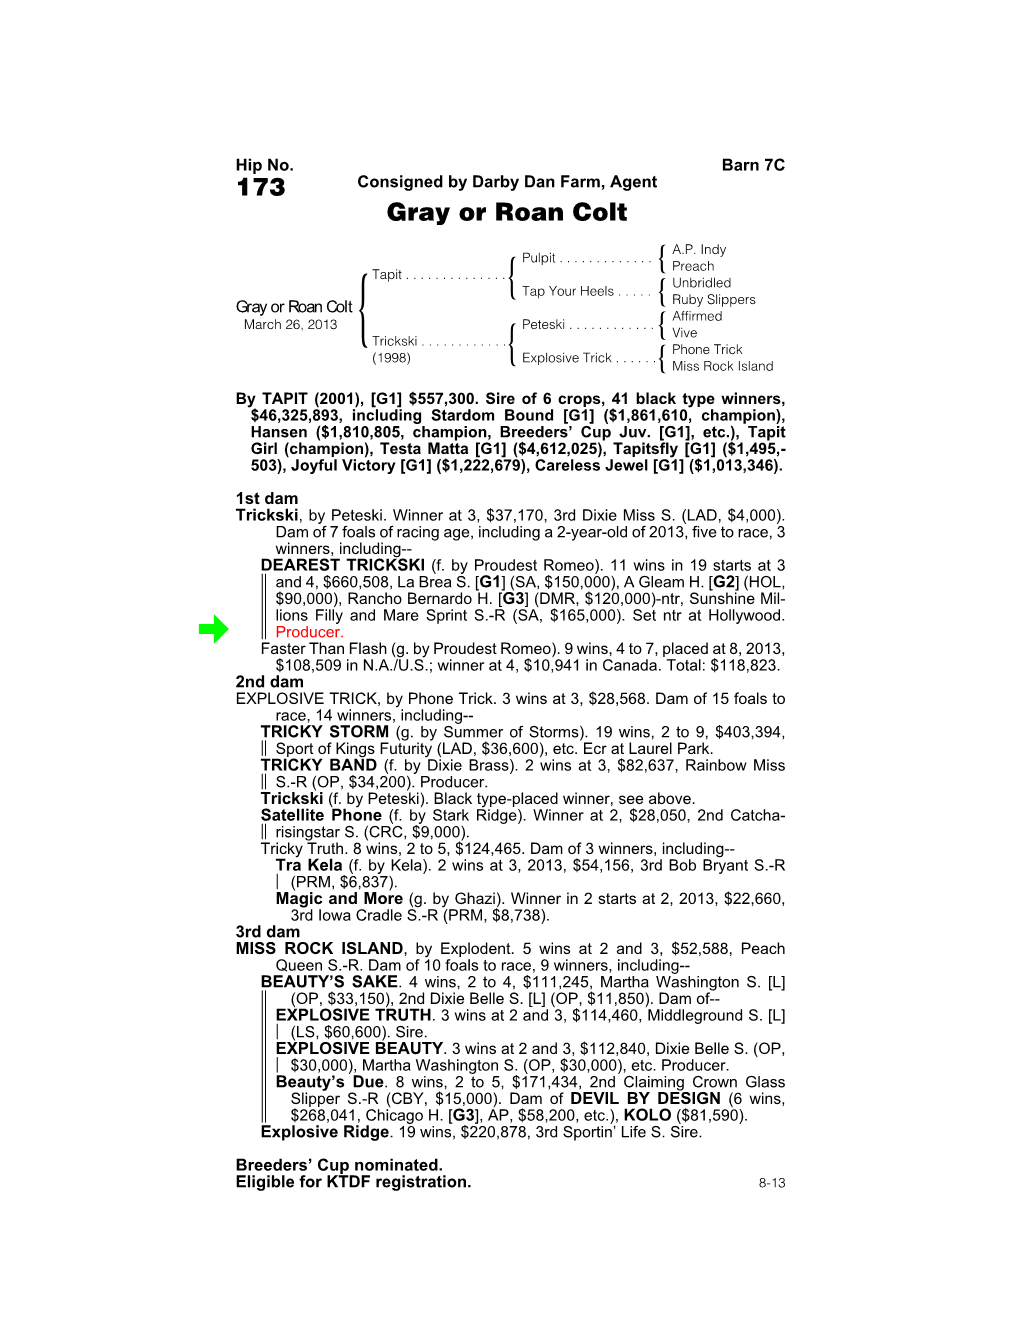 173 Consigned by Darby Dan Farm, Agent Gray Or Roan Colt